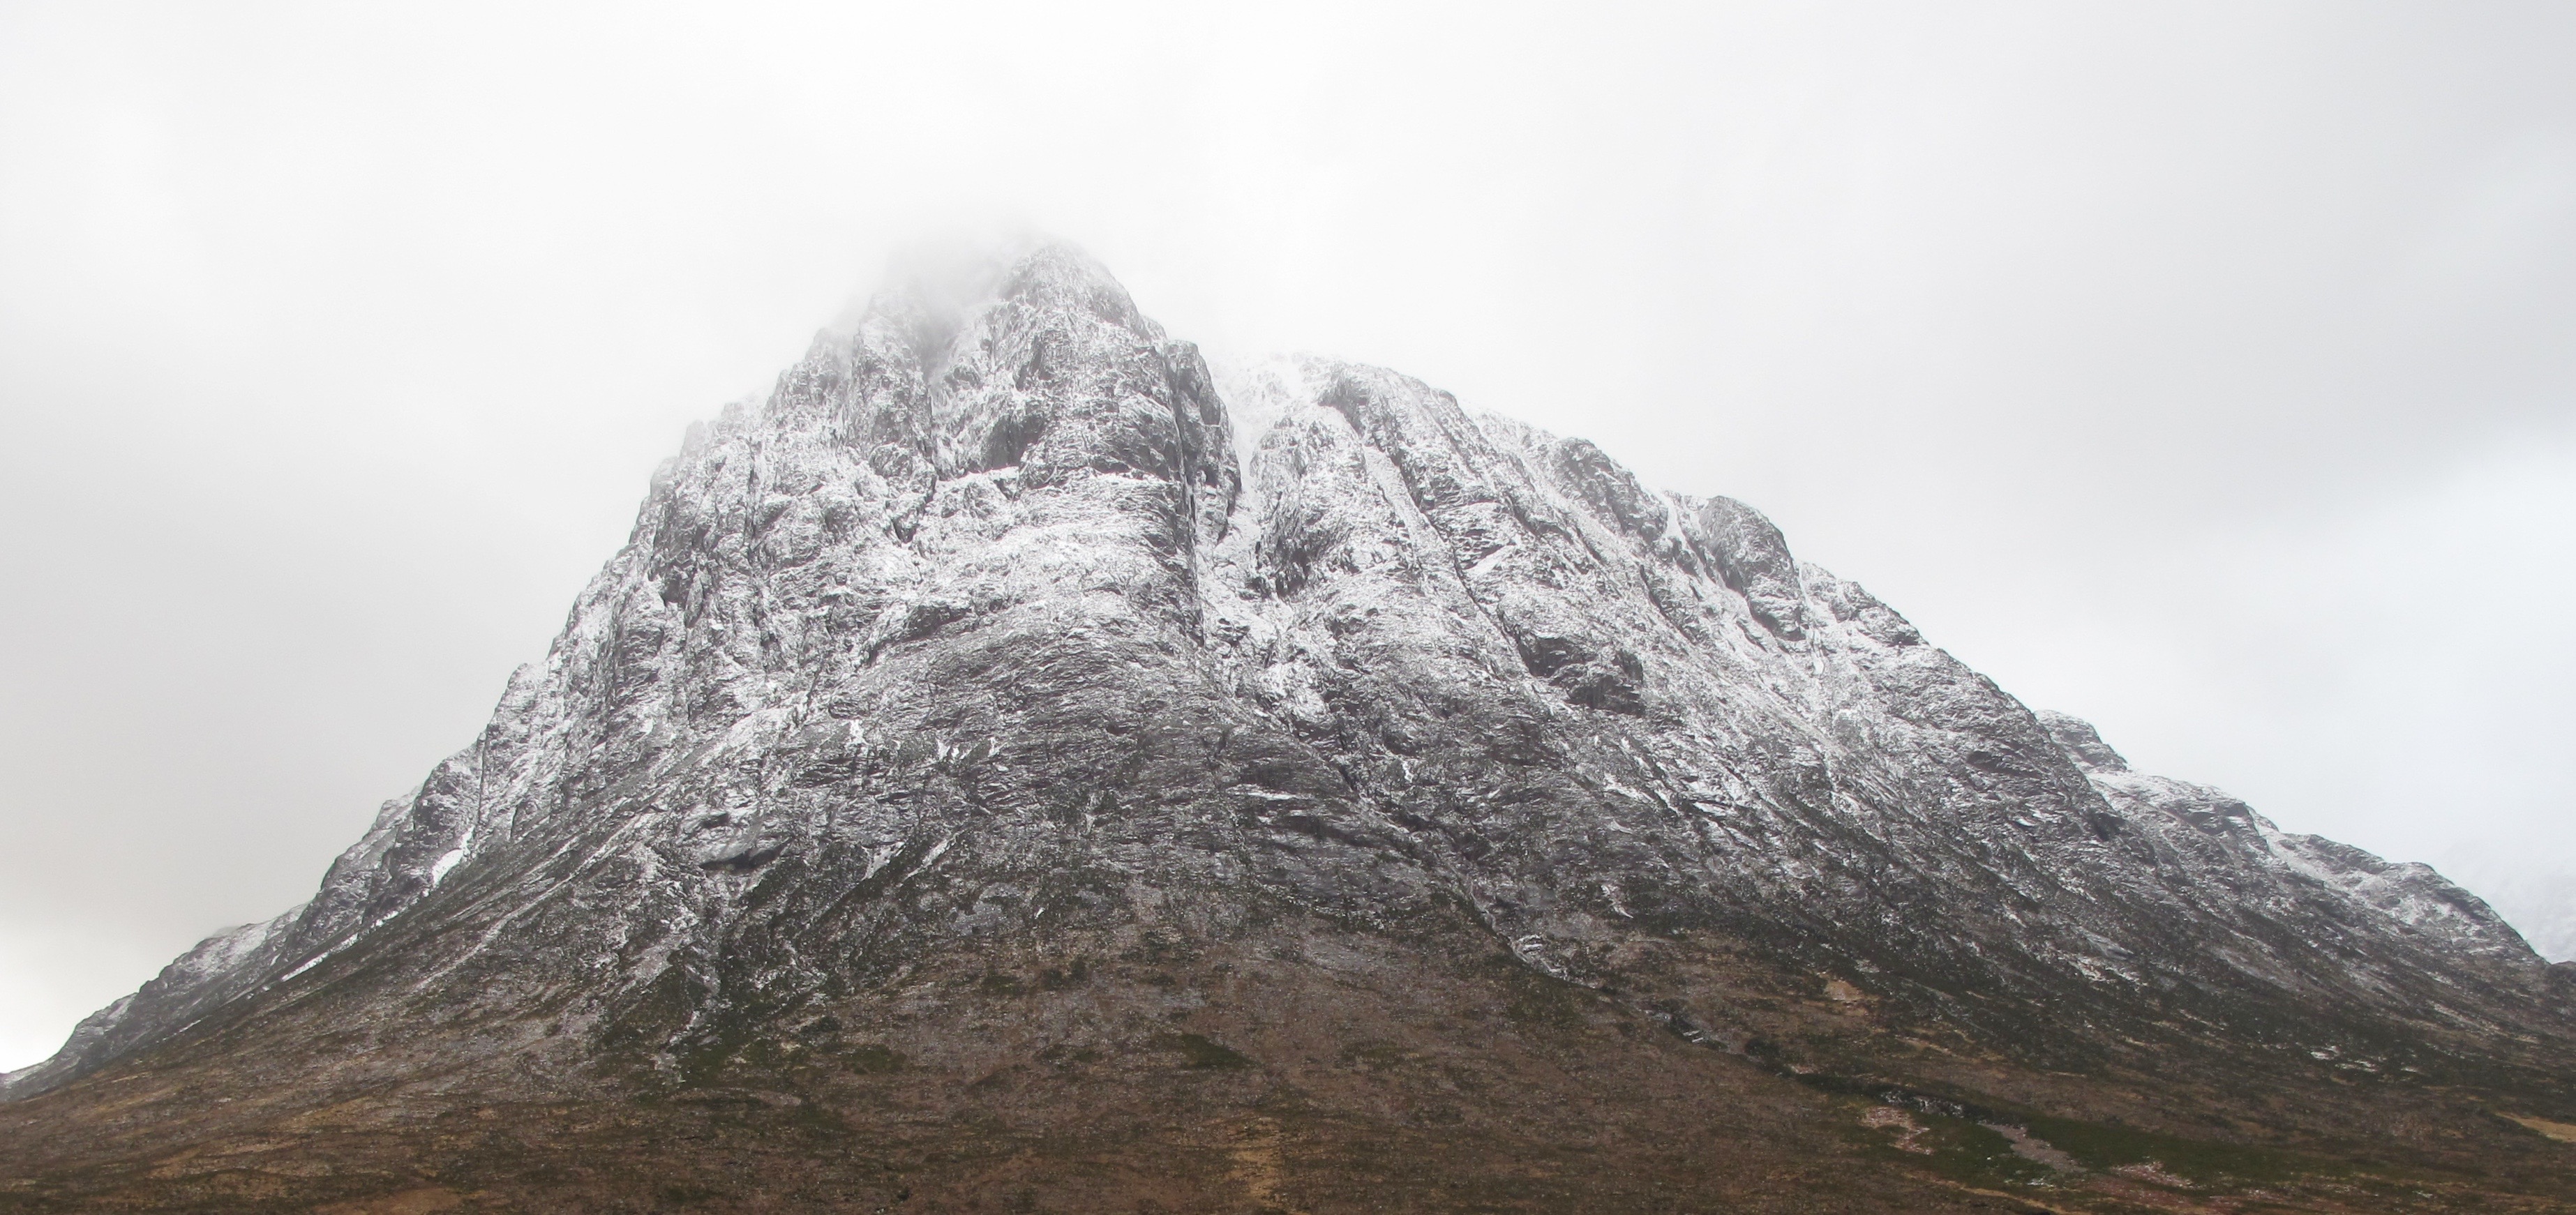 North Face of Stob Dearg shows the snowline clearly.